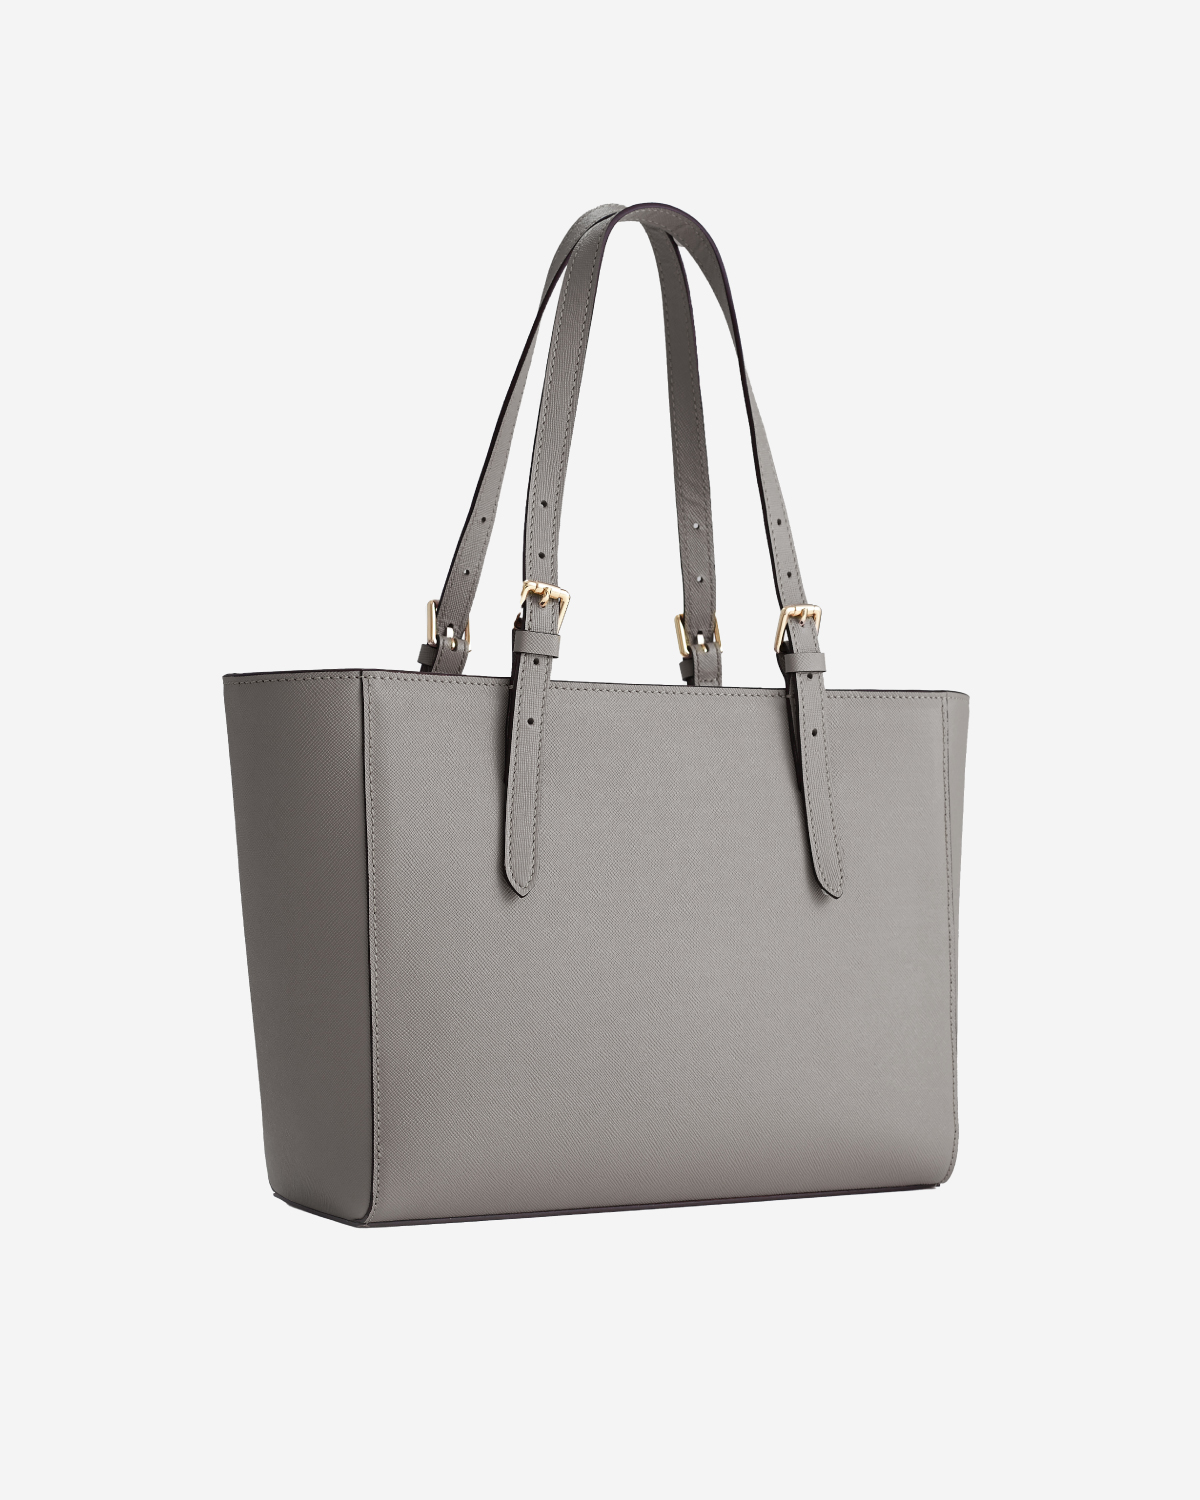 VERA The First Bag in Taupe